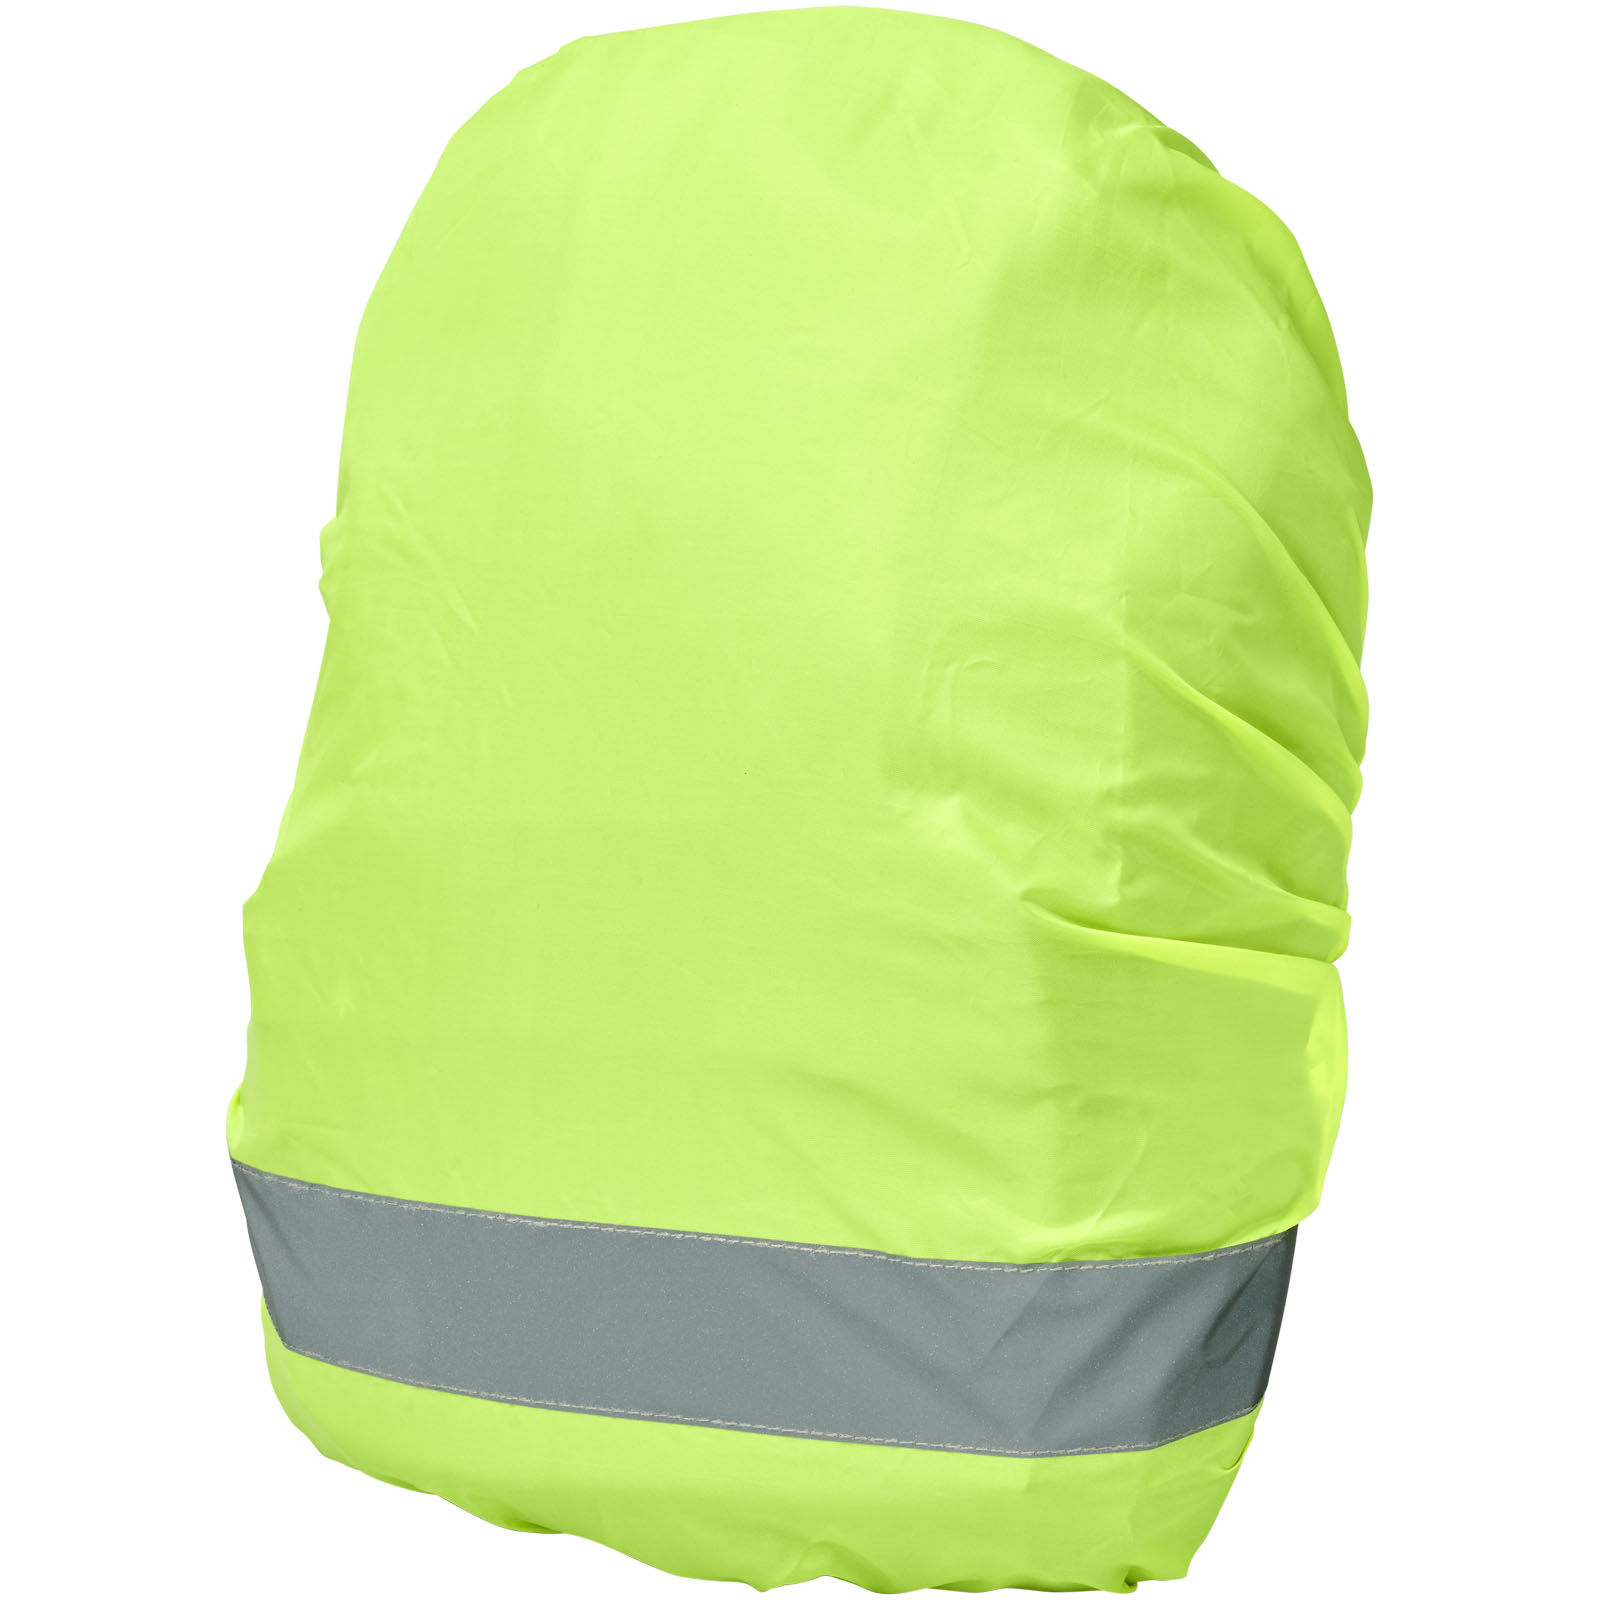 Advertising Reflective Items - RFX™ William reflective and waterproof bag cover